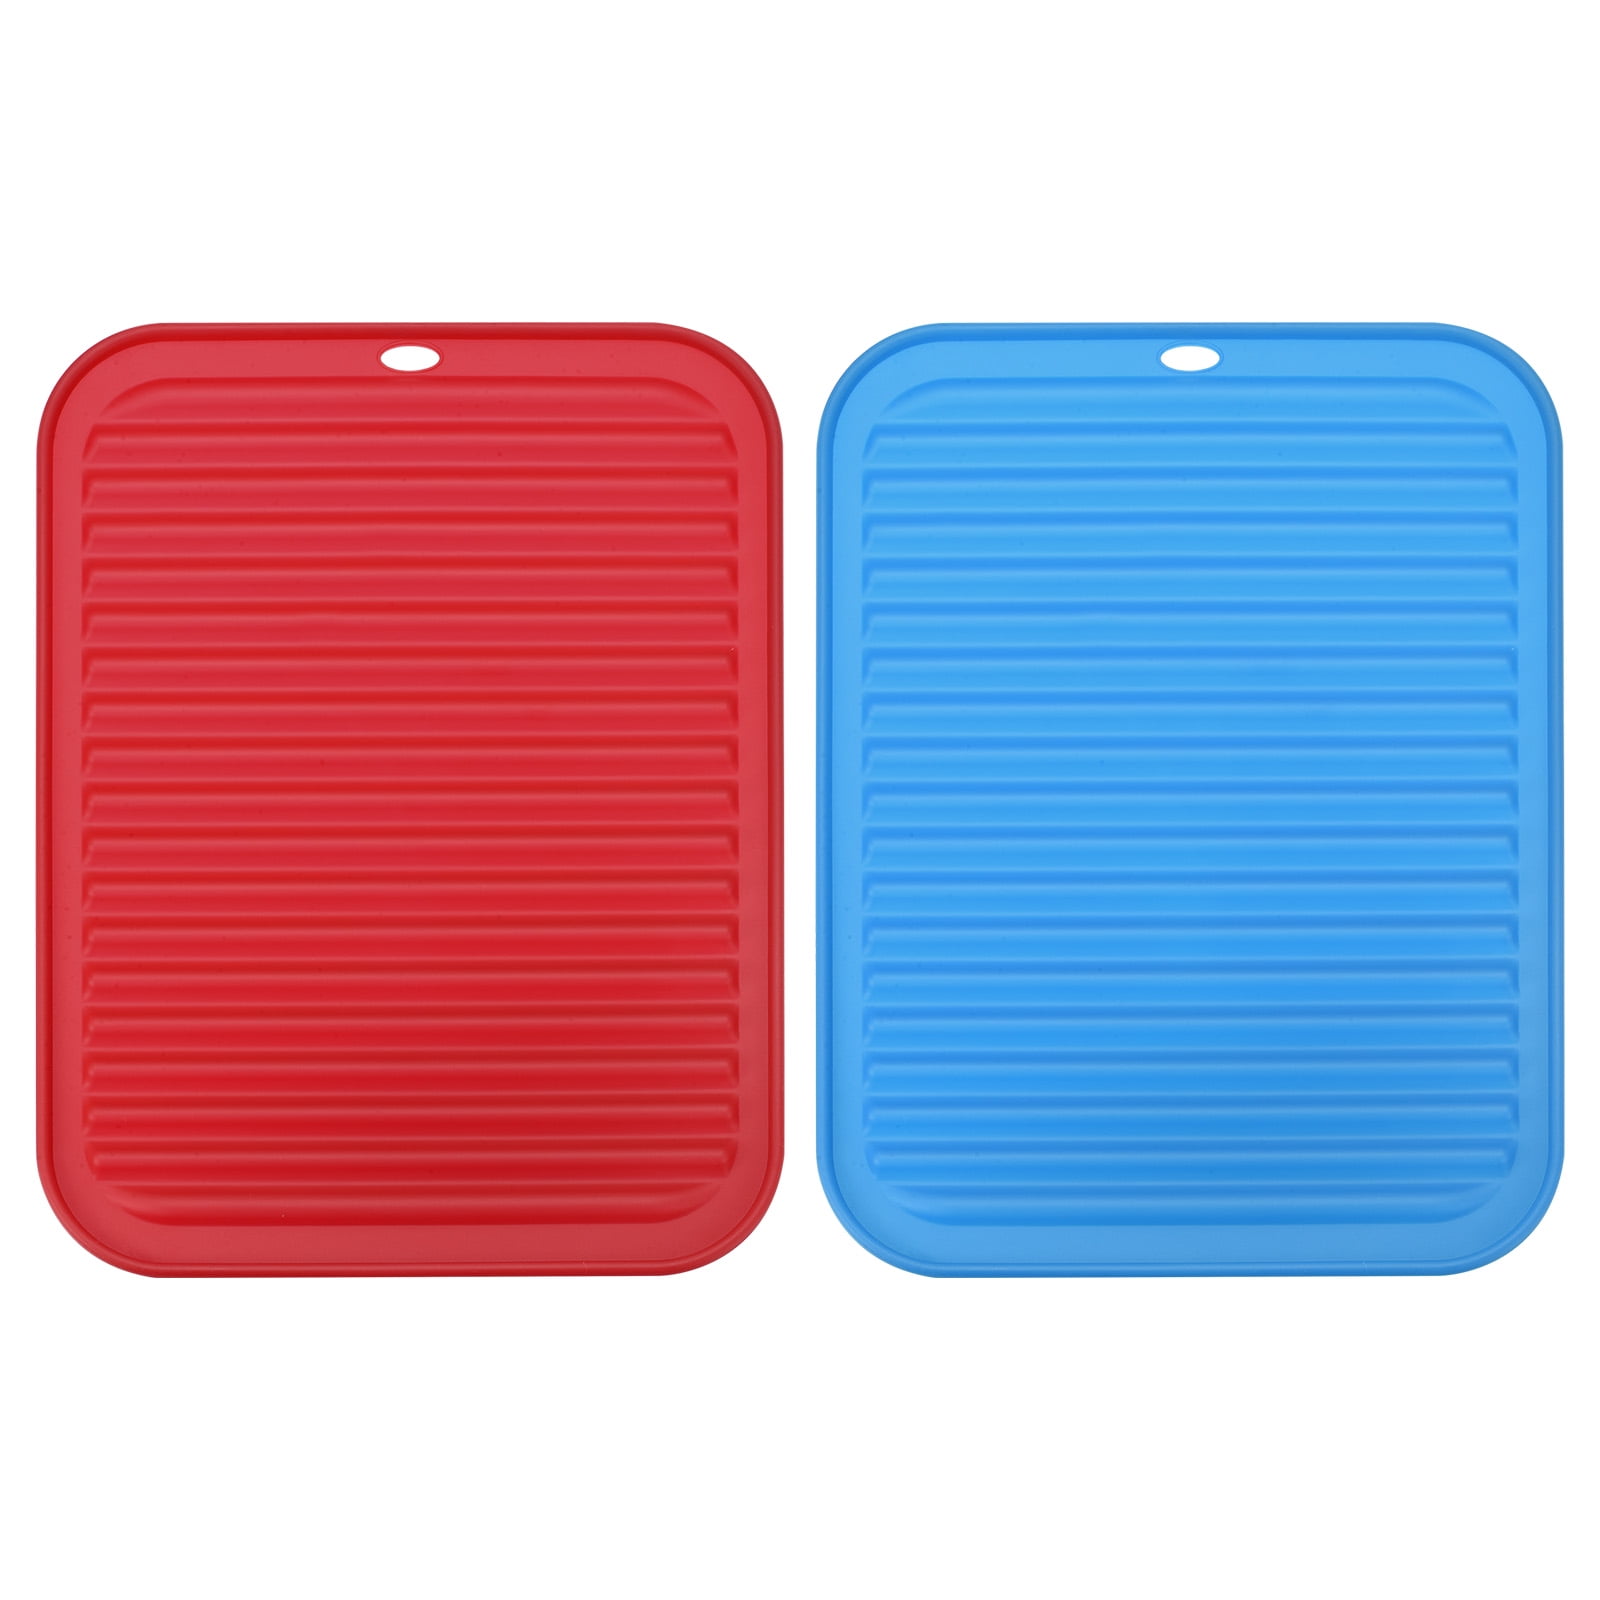 Uxcell Silicone Dish Drying Mat Set, 2 Pcs 12 inch x 9 inch Reusable Sink Drain Pad for Kitchen Counter, Drawer - Red Gray